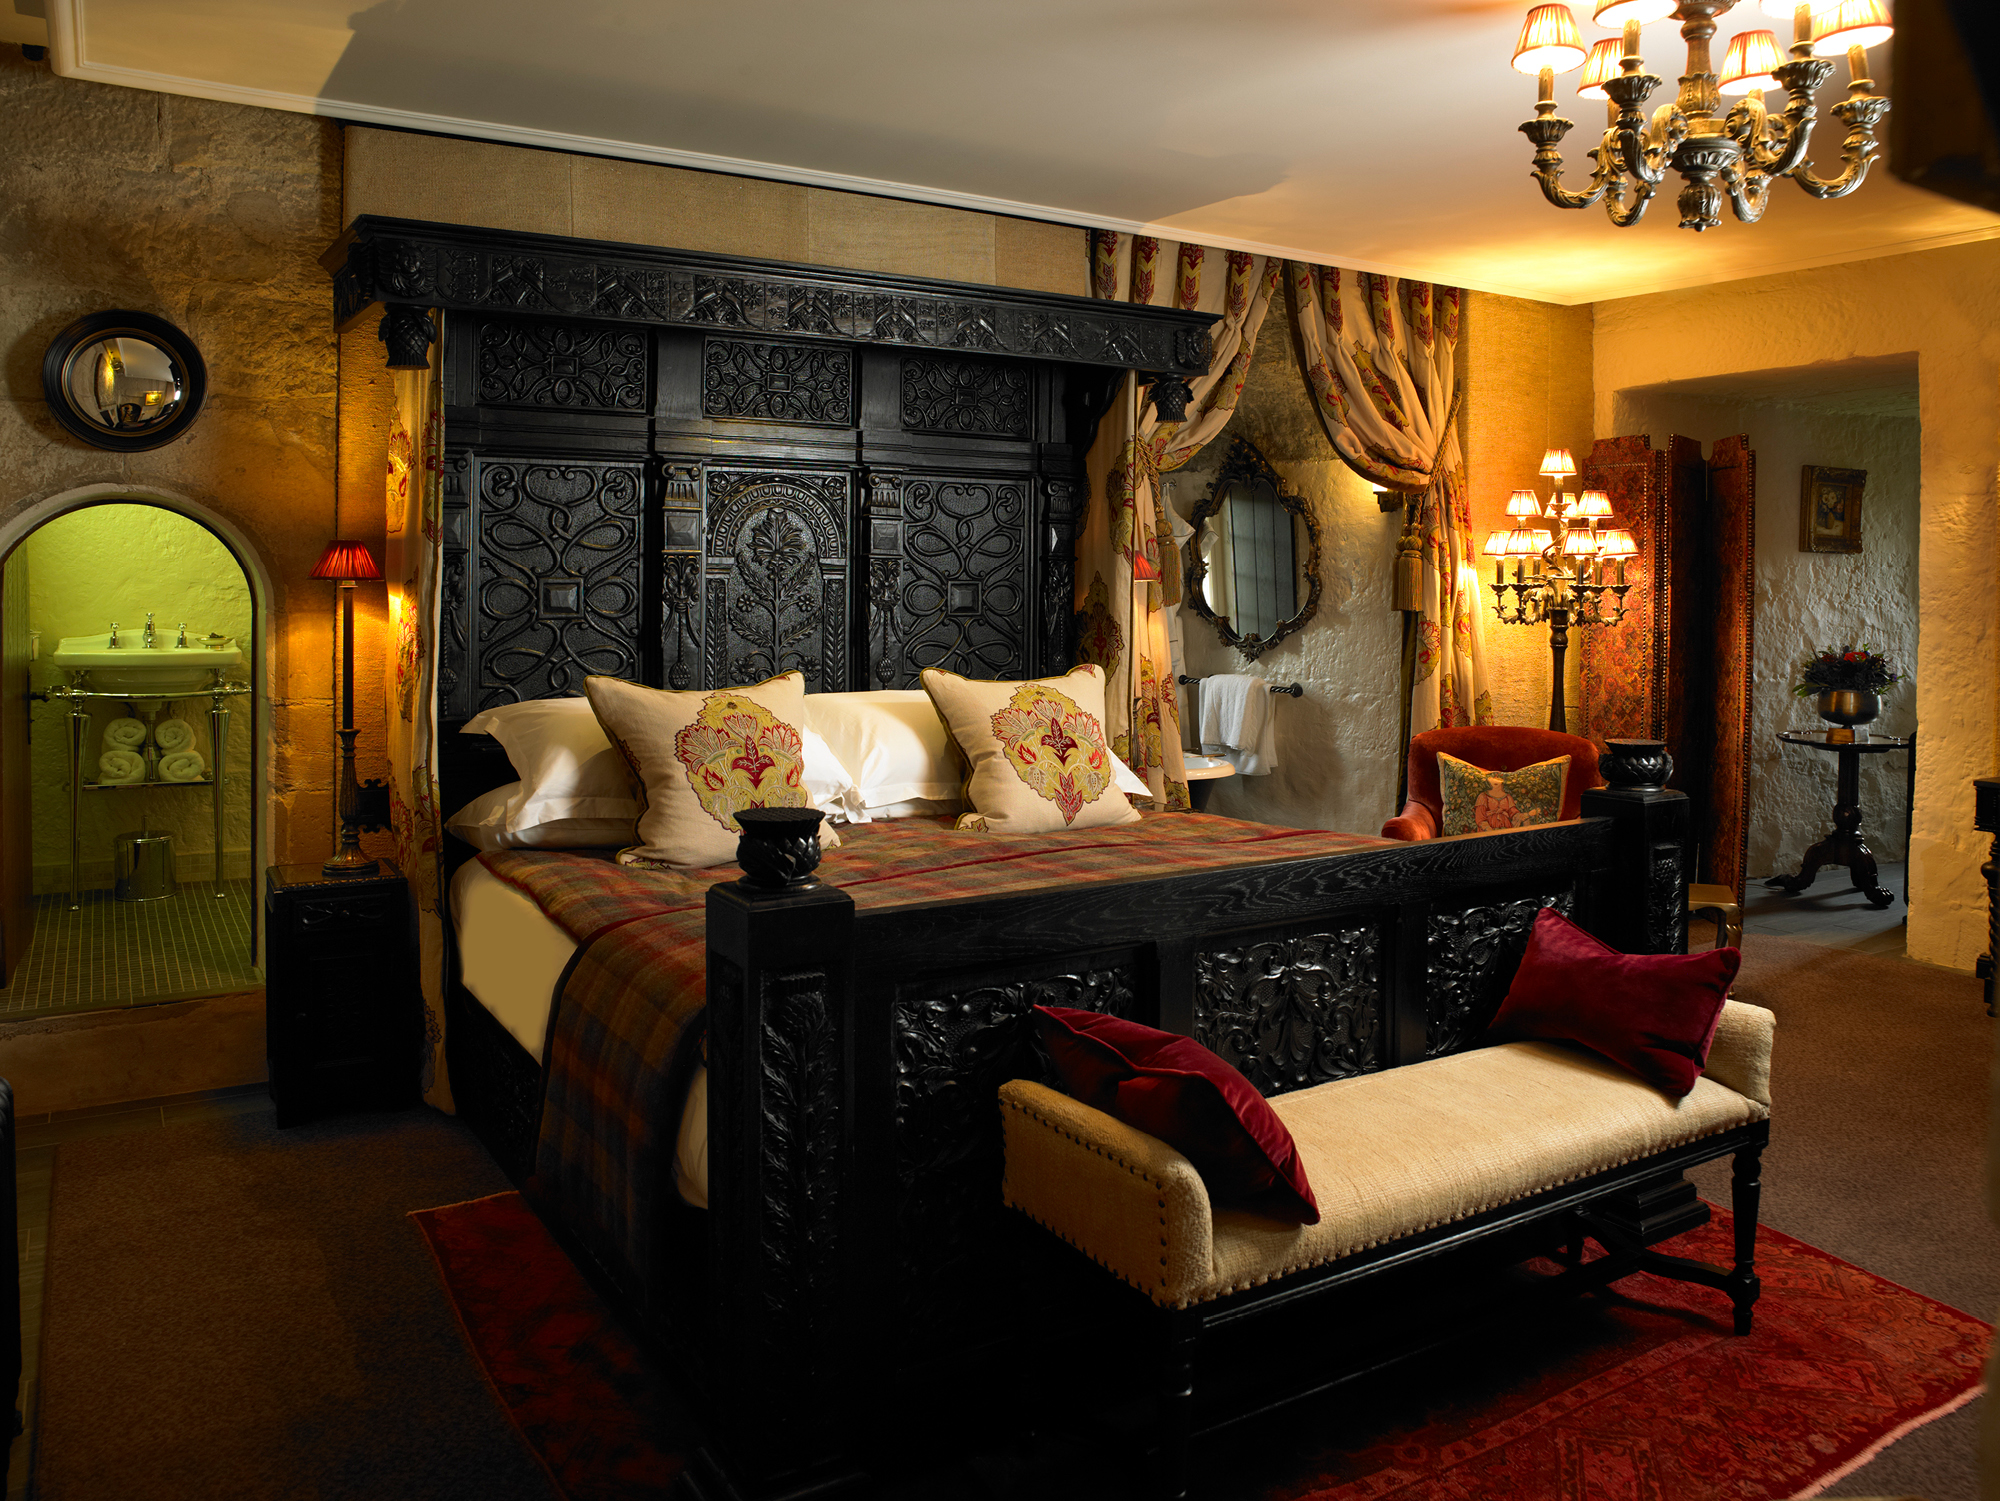 The Mary Queen of Scots bedroom, where the queen stayed when visiting Borthwick Castle